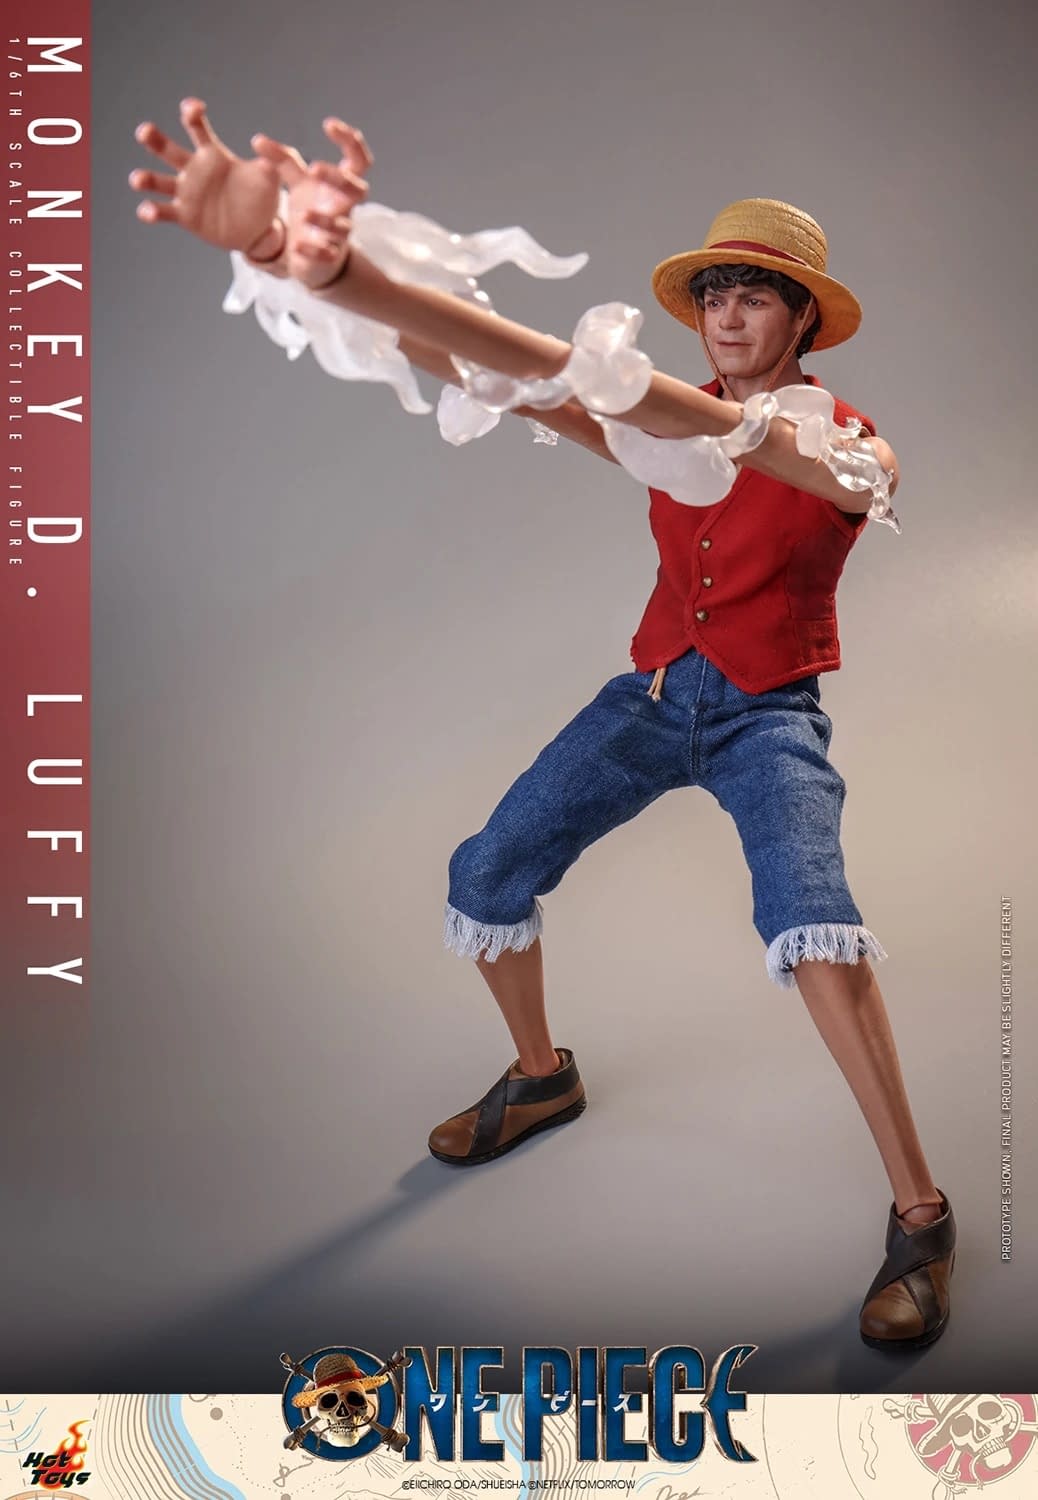 Luffy live action actor went on adventure to prepare role